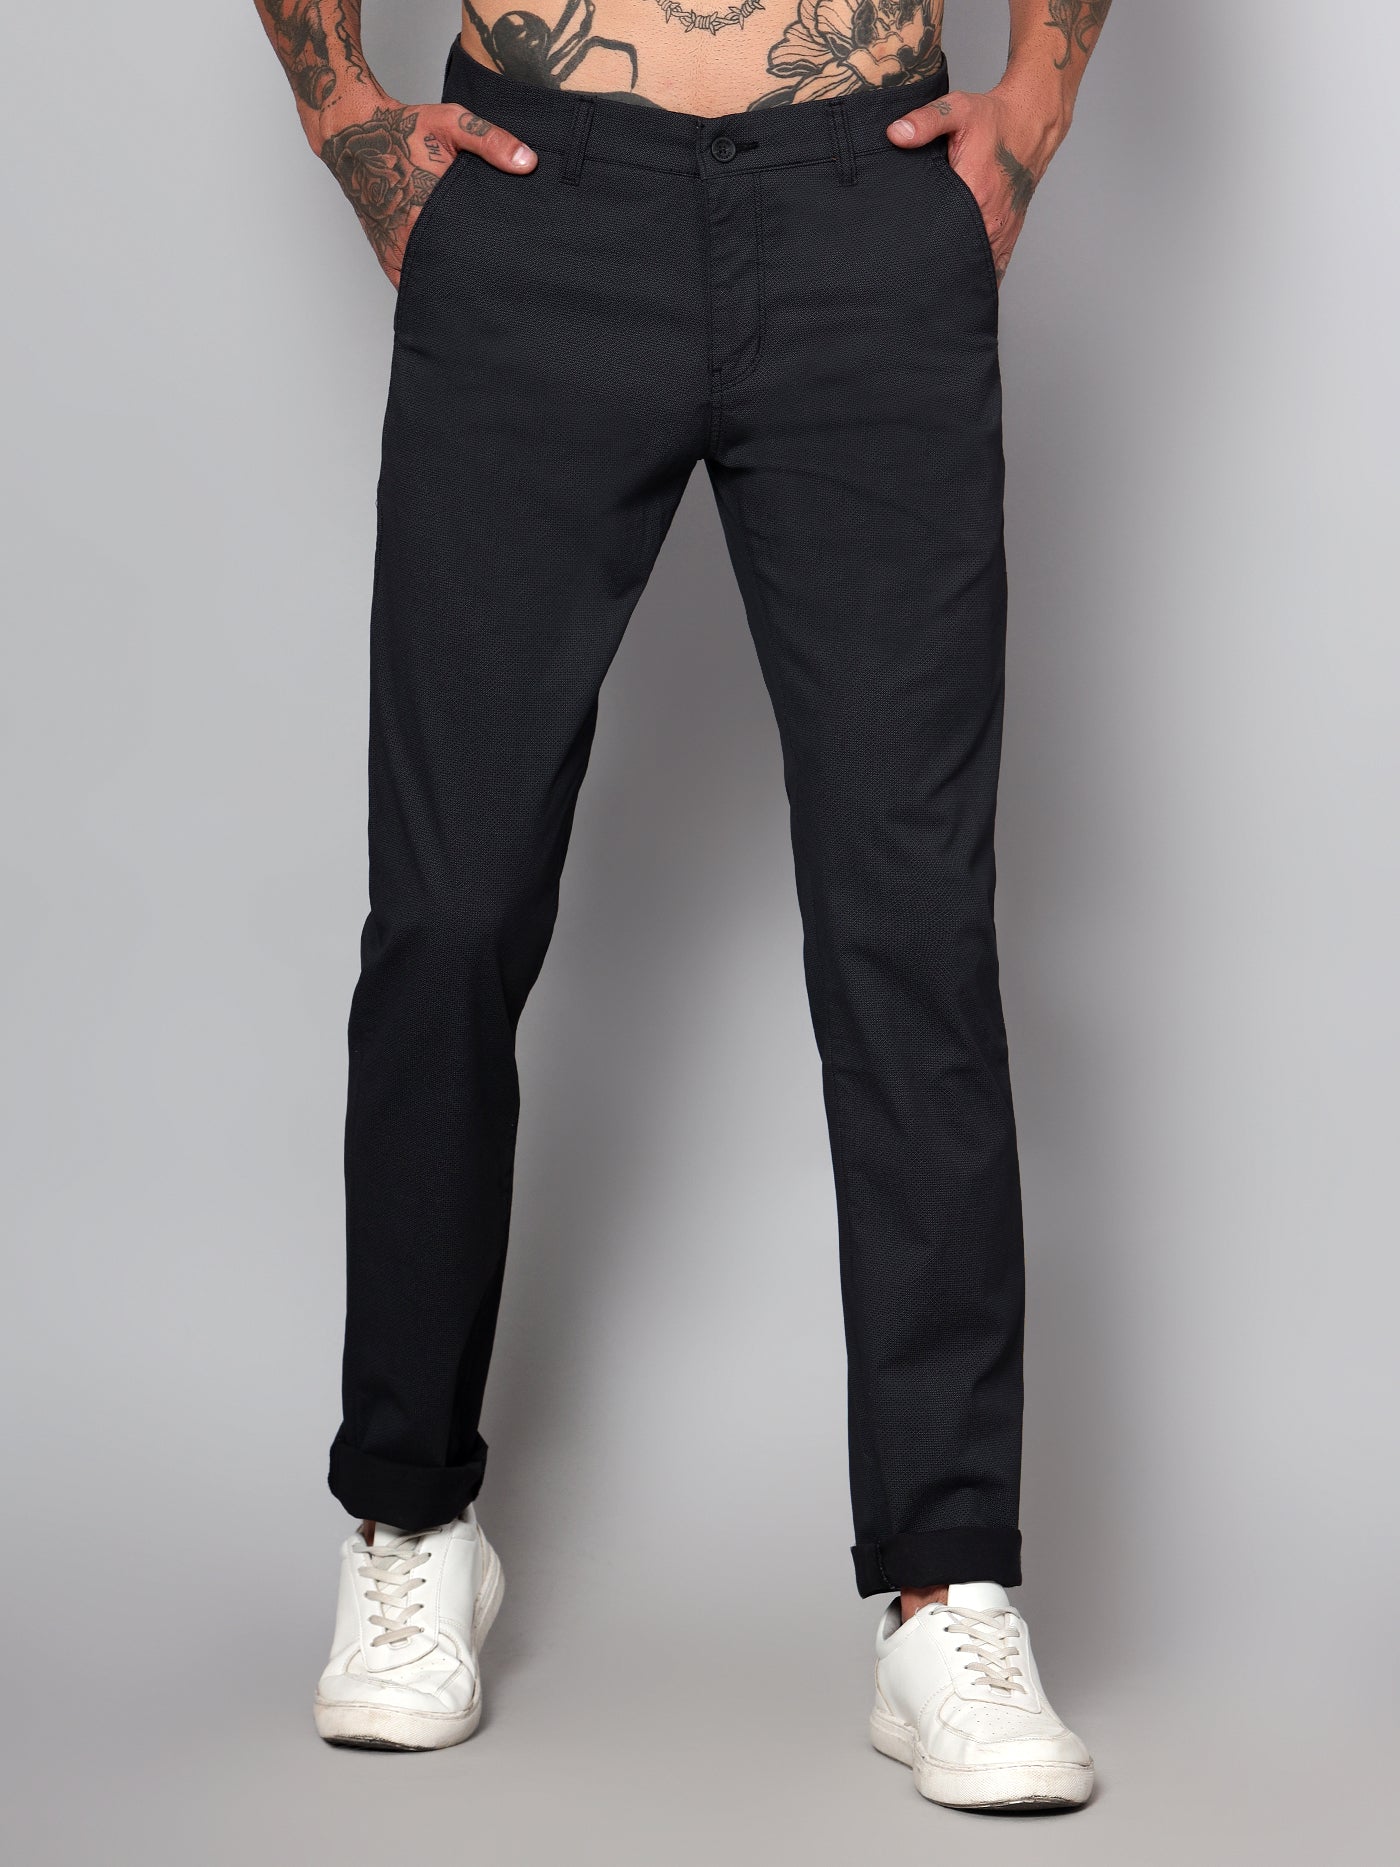 Amazon.in: Ankle Fit Formal Pants For Men